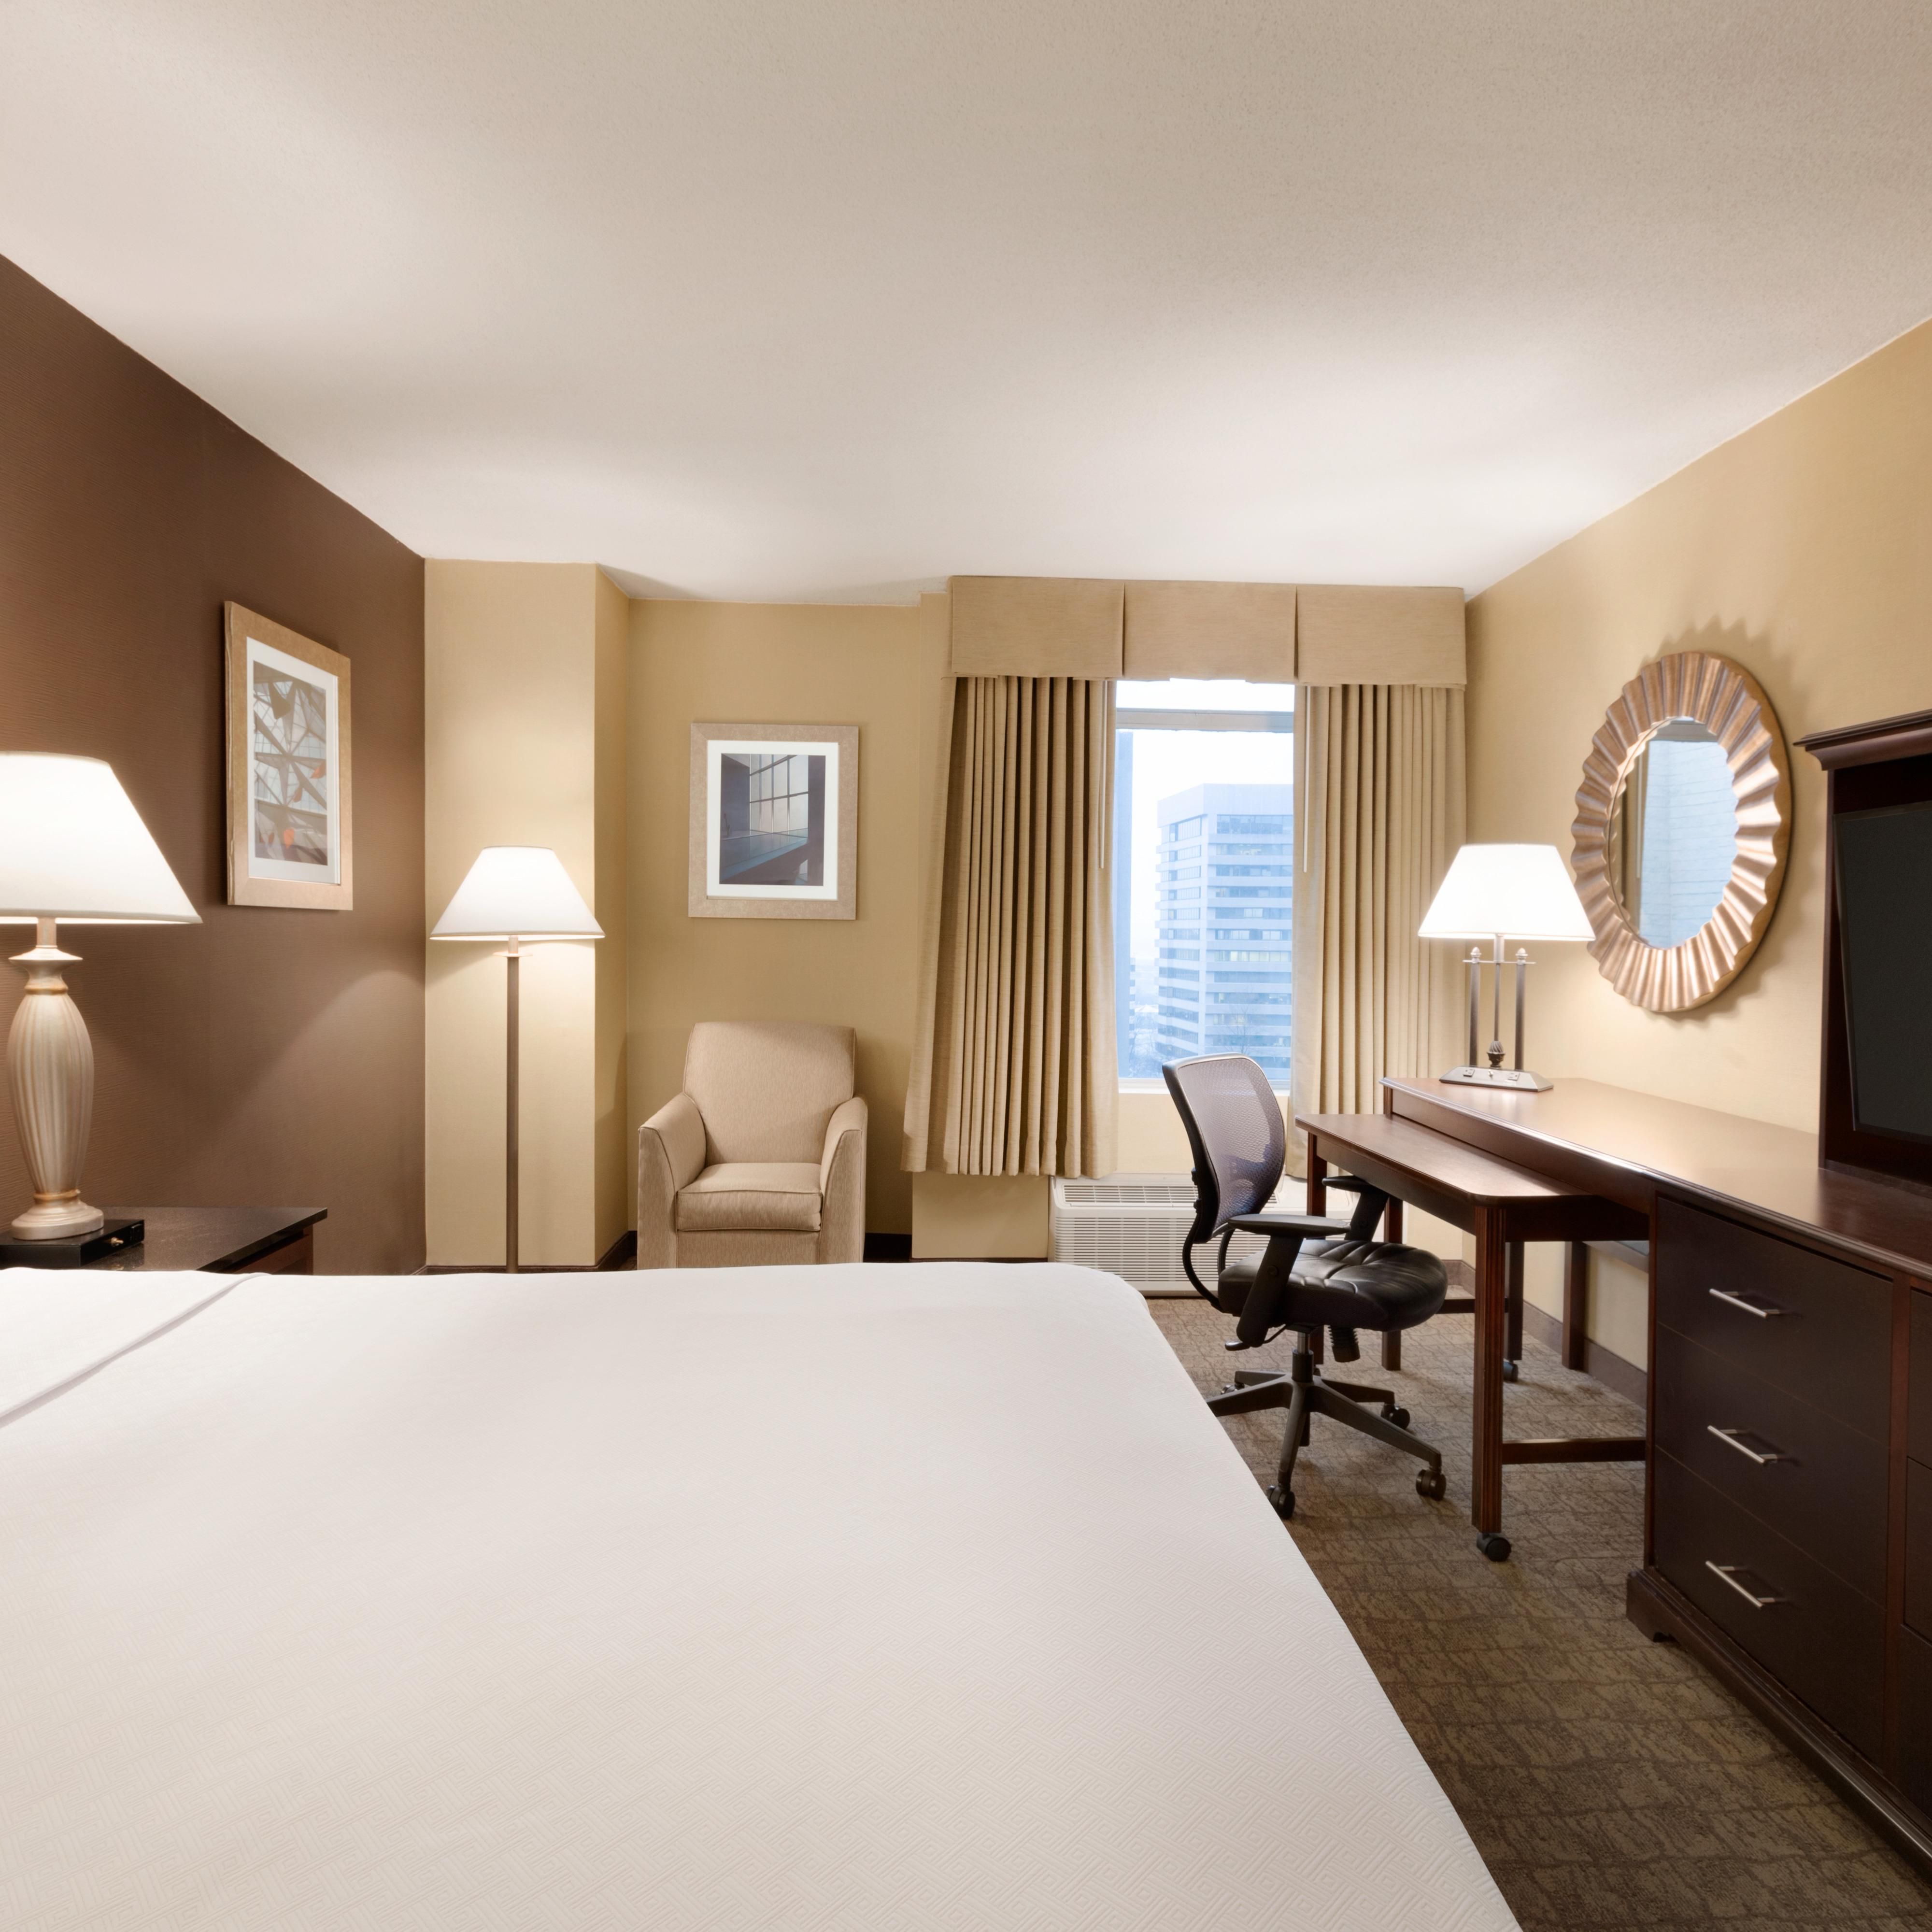 Enjoy Your Stay in our Relaxing and Spacious King Room.